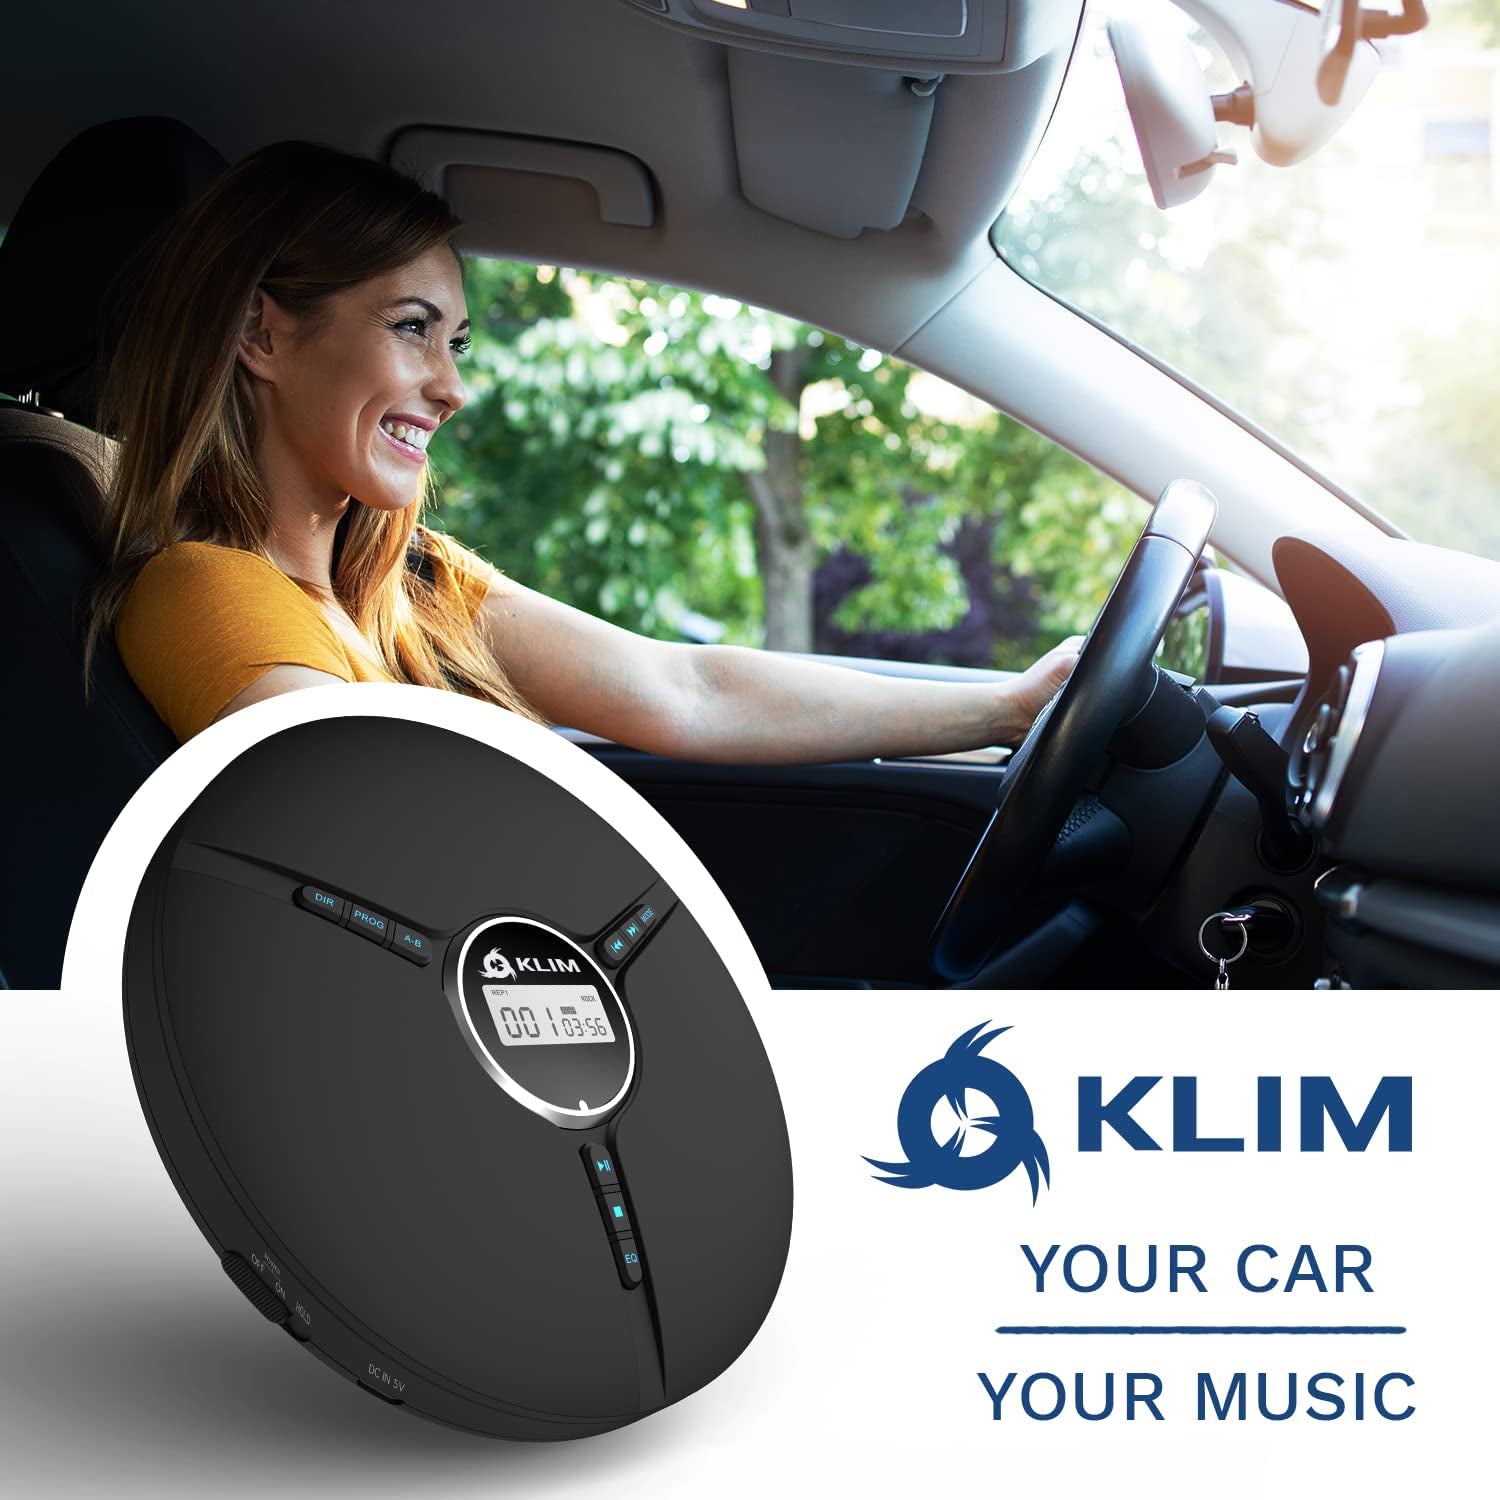 Discman Portable CD Player with Built-In Battery, Ideal Car Companion + Earphones, CD-R, CD-RW, MP3. Compact Personal CD Walkman 